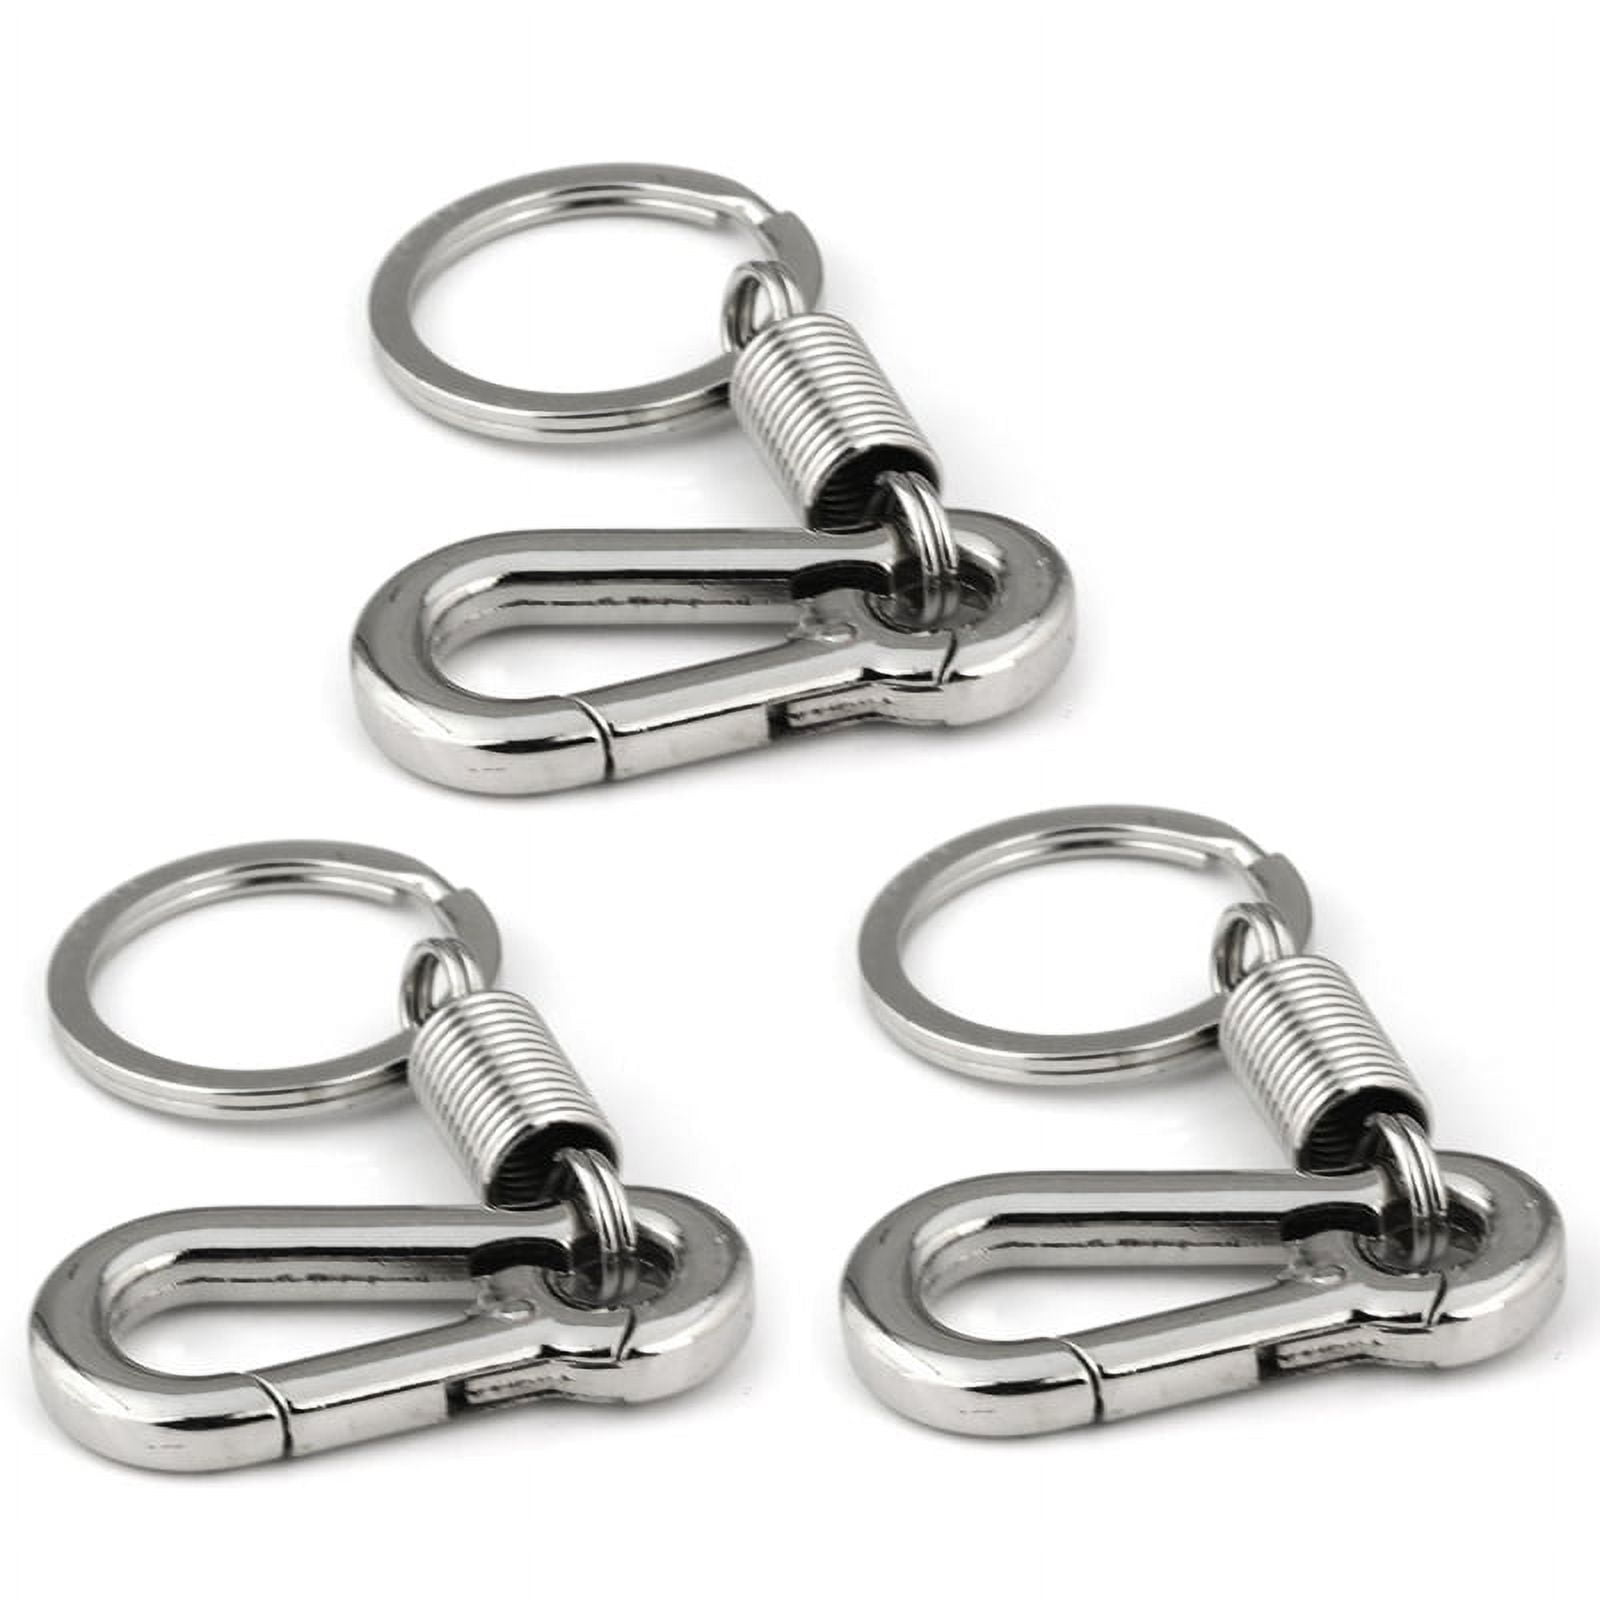 Carabiner Key Chains, (10) 1 x 2 Black Carabiners, (10) 1 dia Silver Key  Rings, Aluminum - Advanced Safety Supply, PPE, Safety Training, Workwear,  MRO Supplies